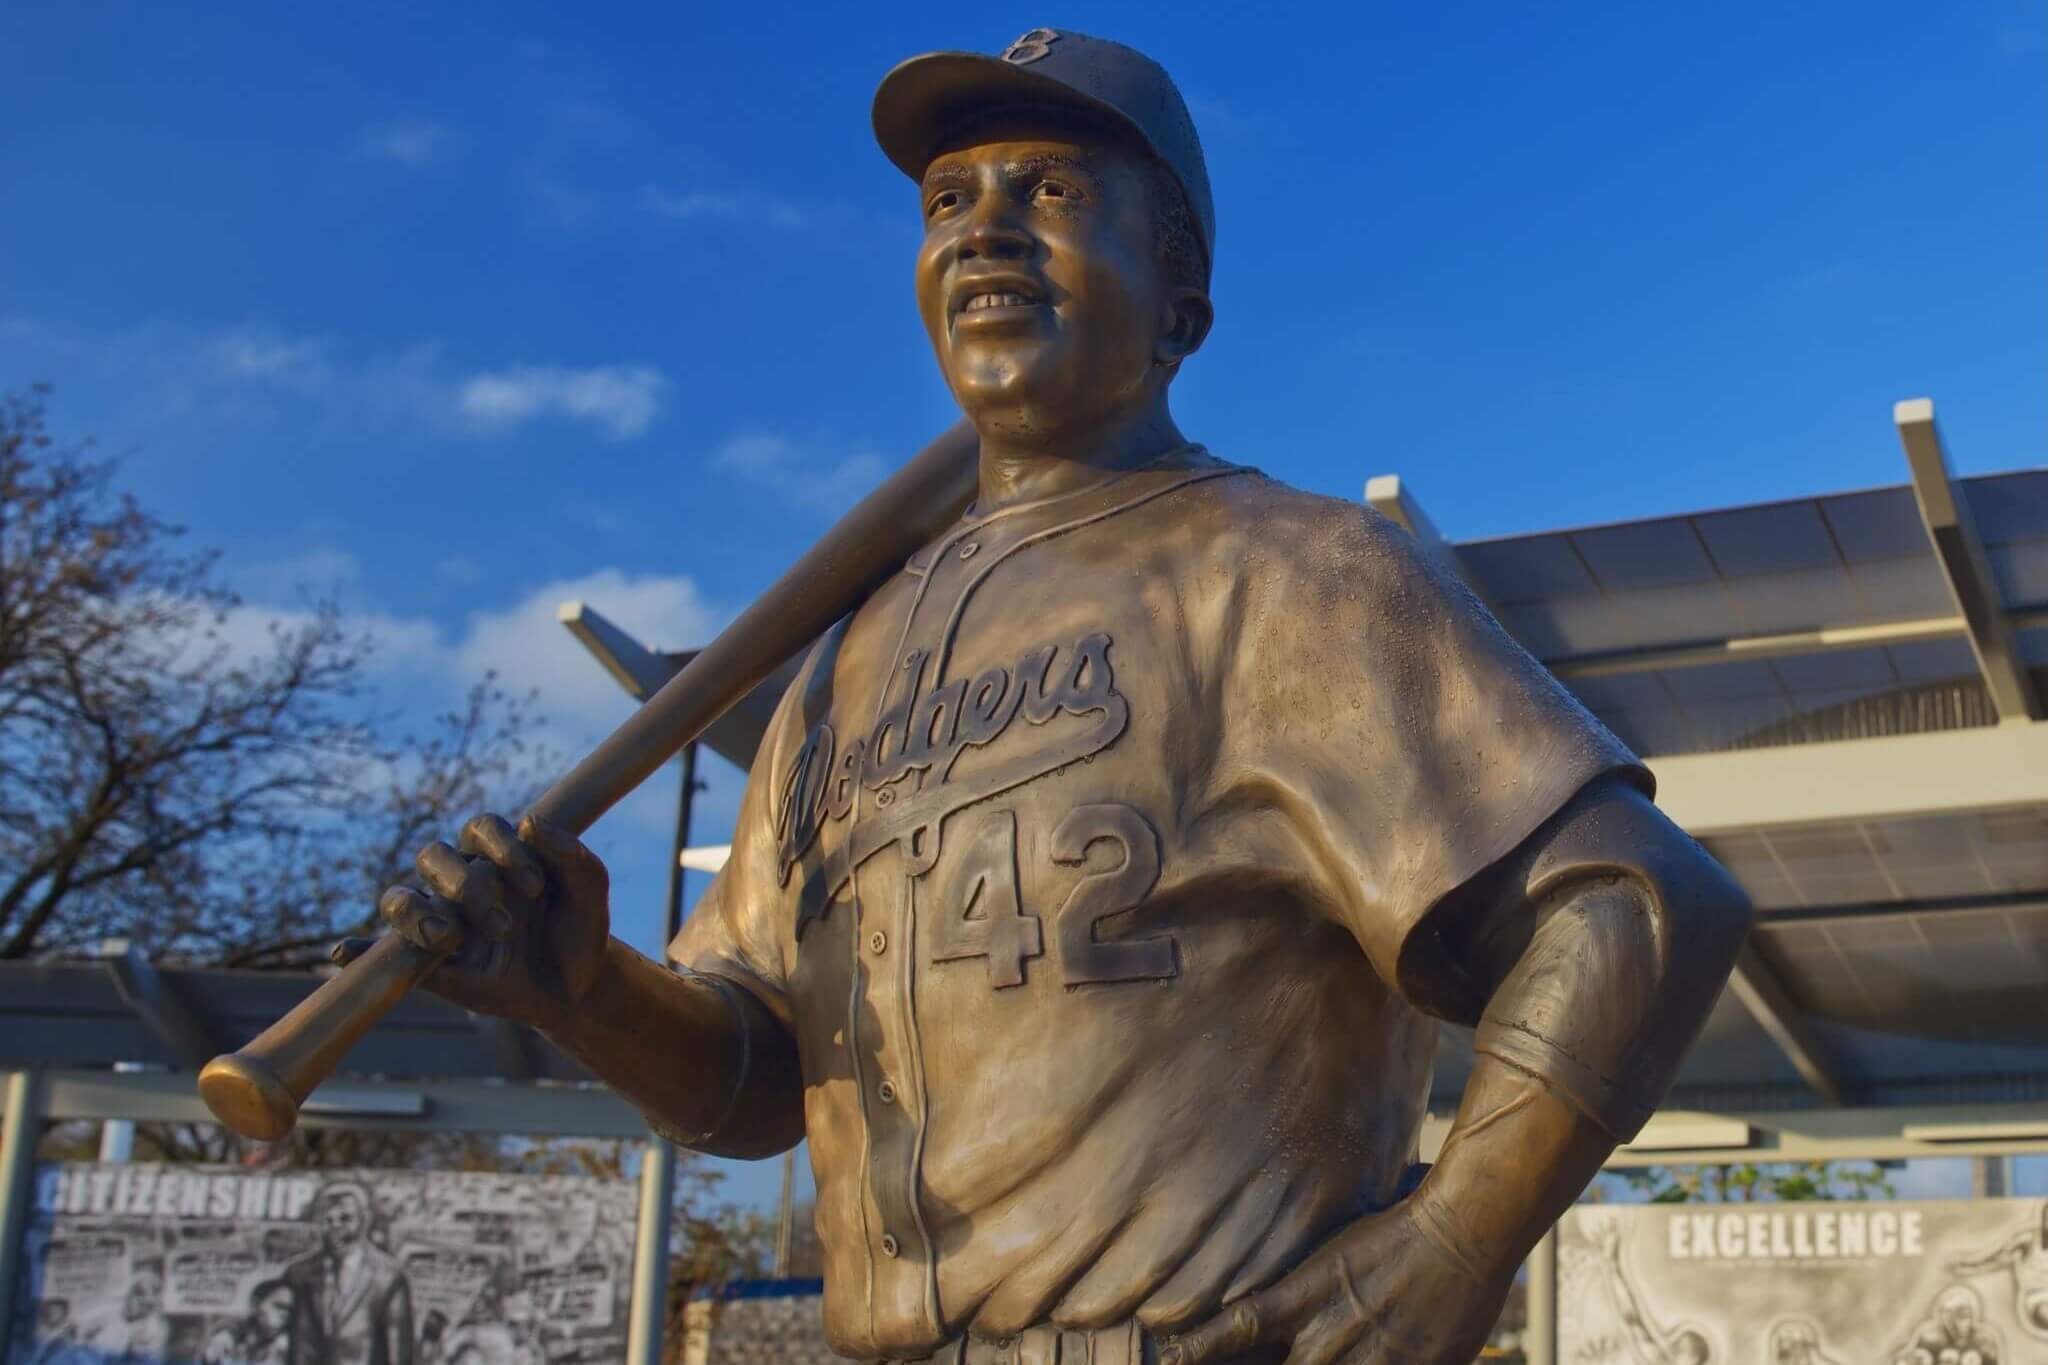 Kansas man who destroyed Jackie Robinson statue sentenced to 15 years in prison